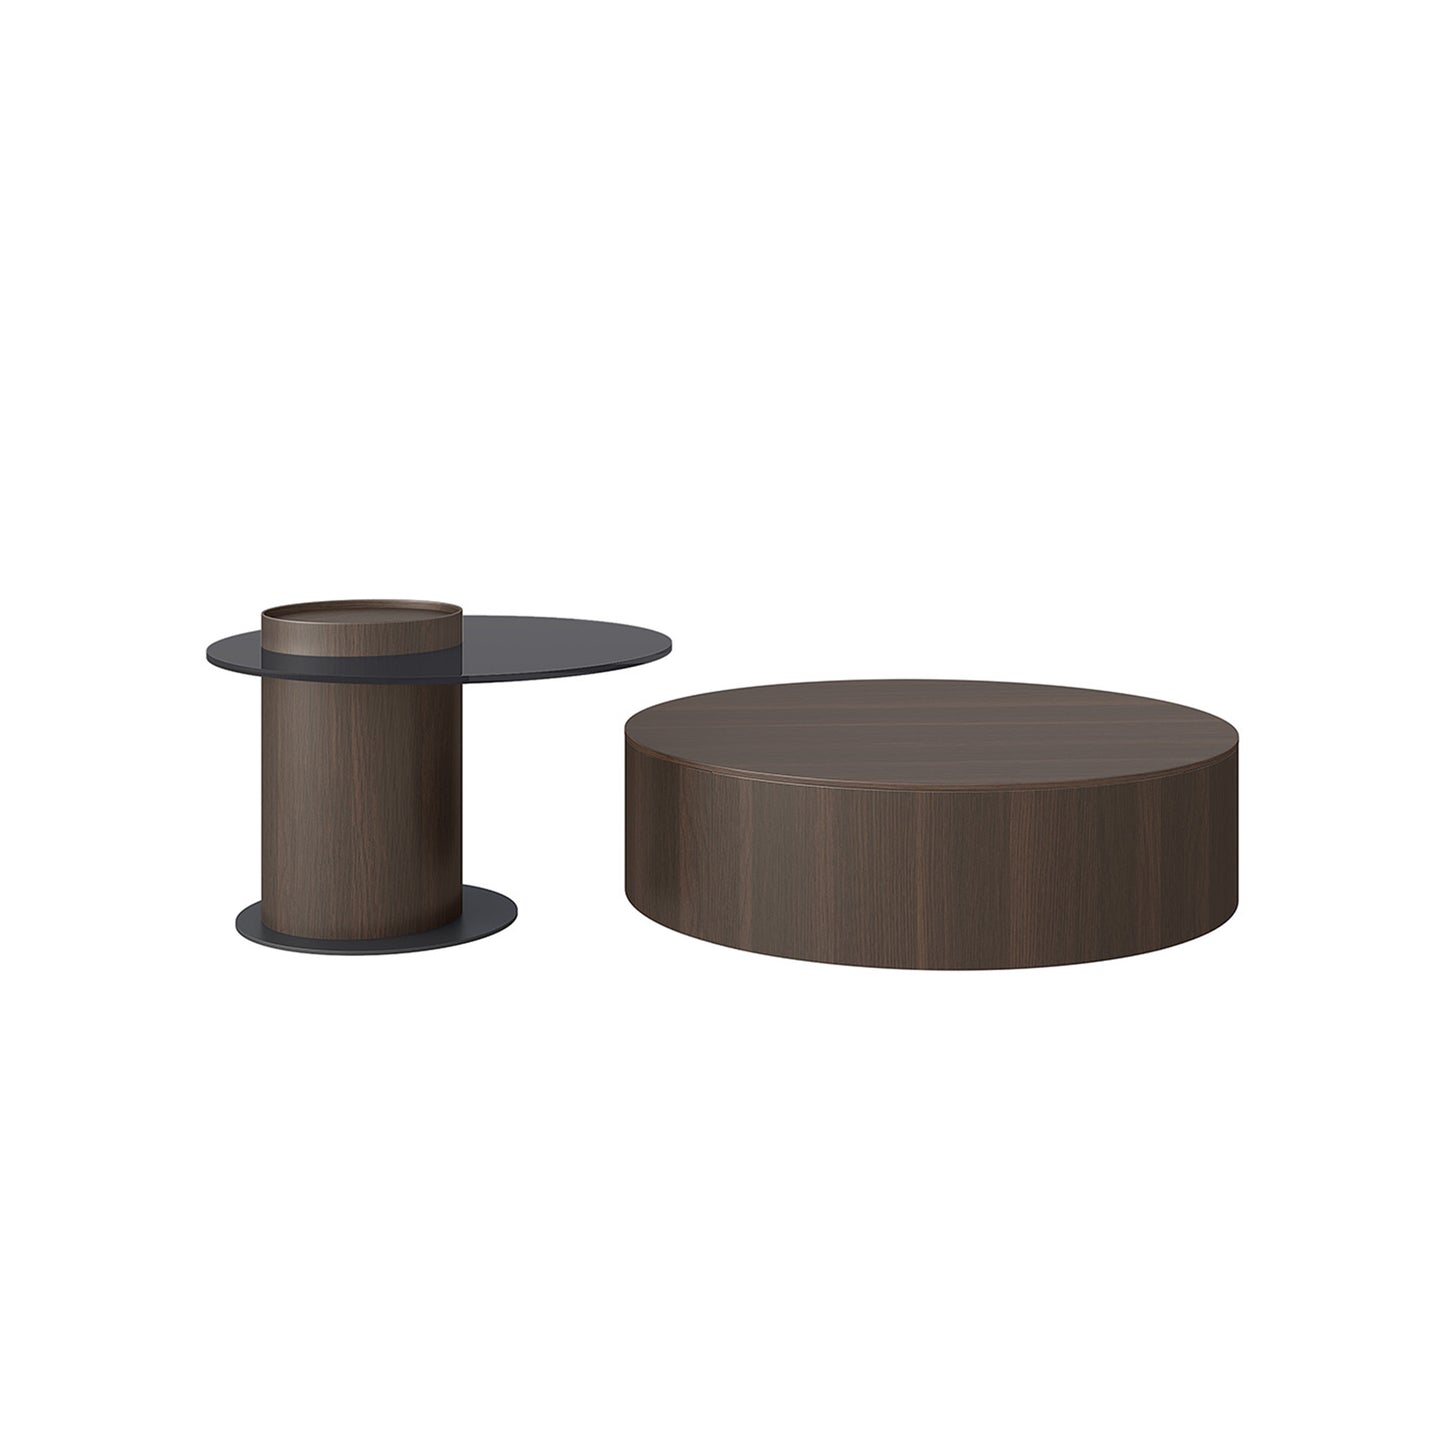 Walnut Color Smoked Glass Round Coffee Table Set